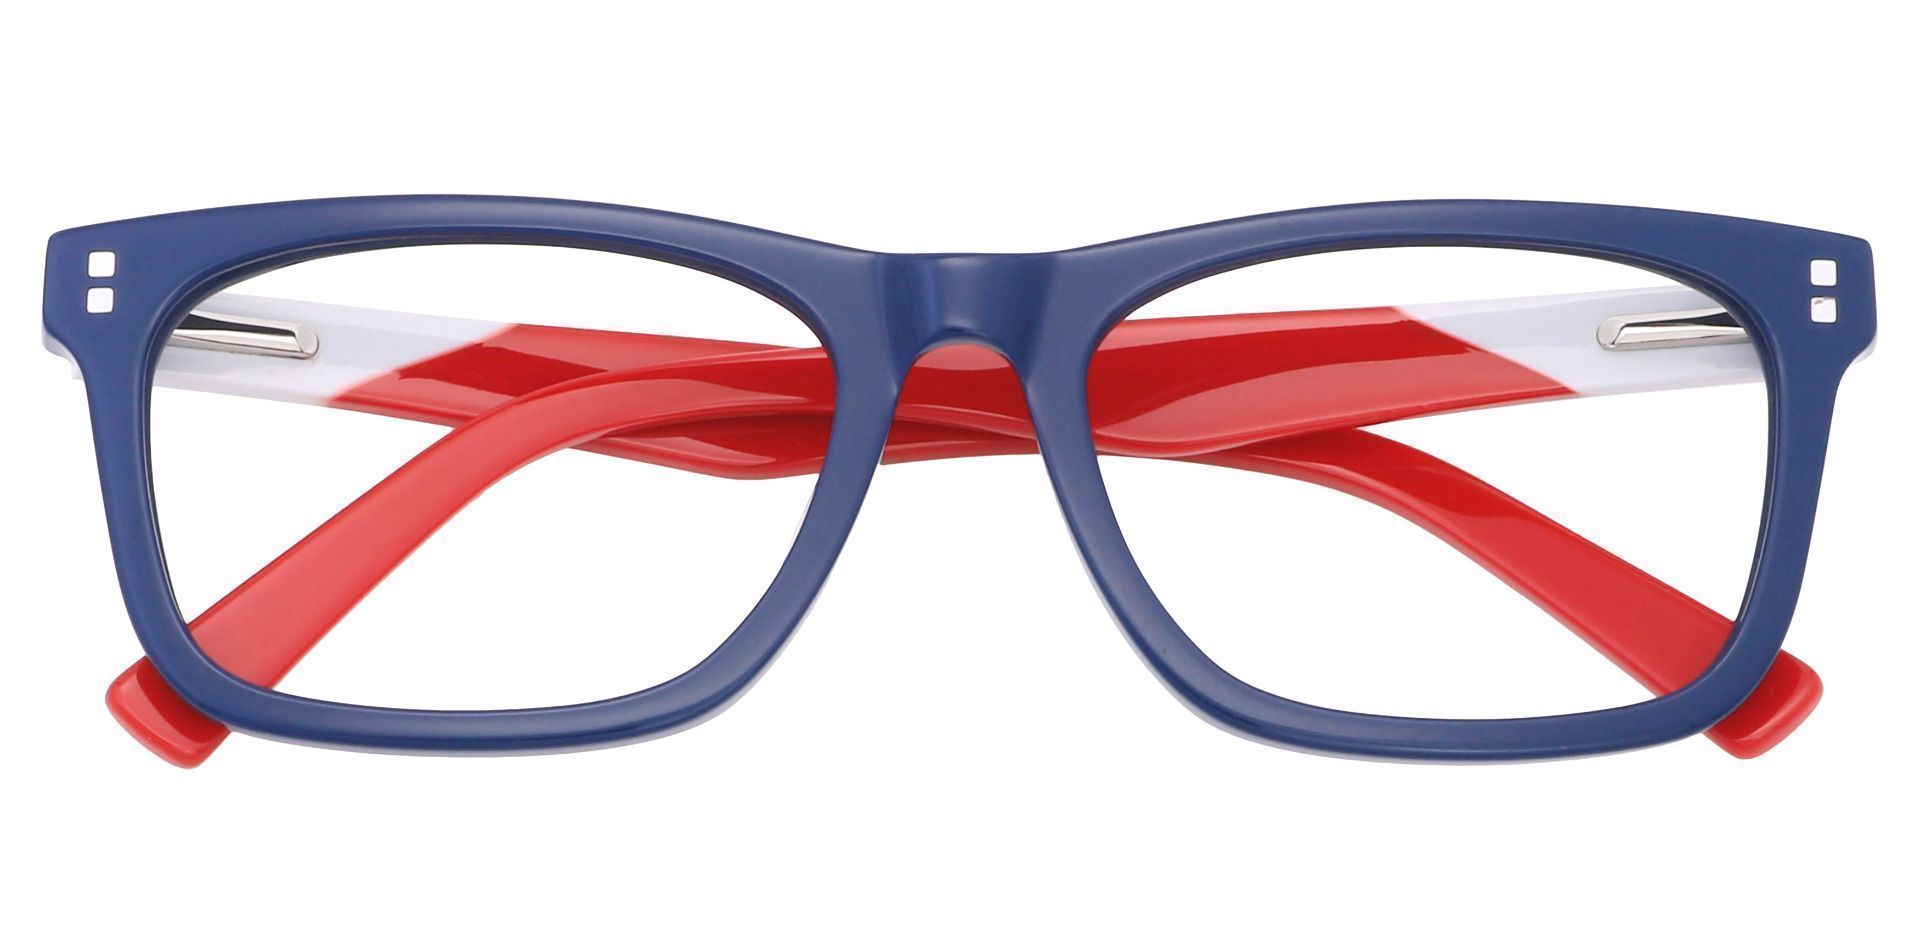 Newbury Rectangle Progressive Glasses - The Frame Is Blue And Red